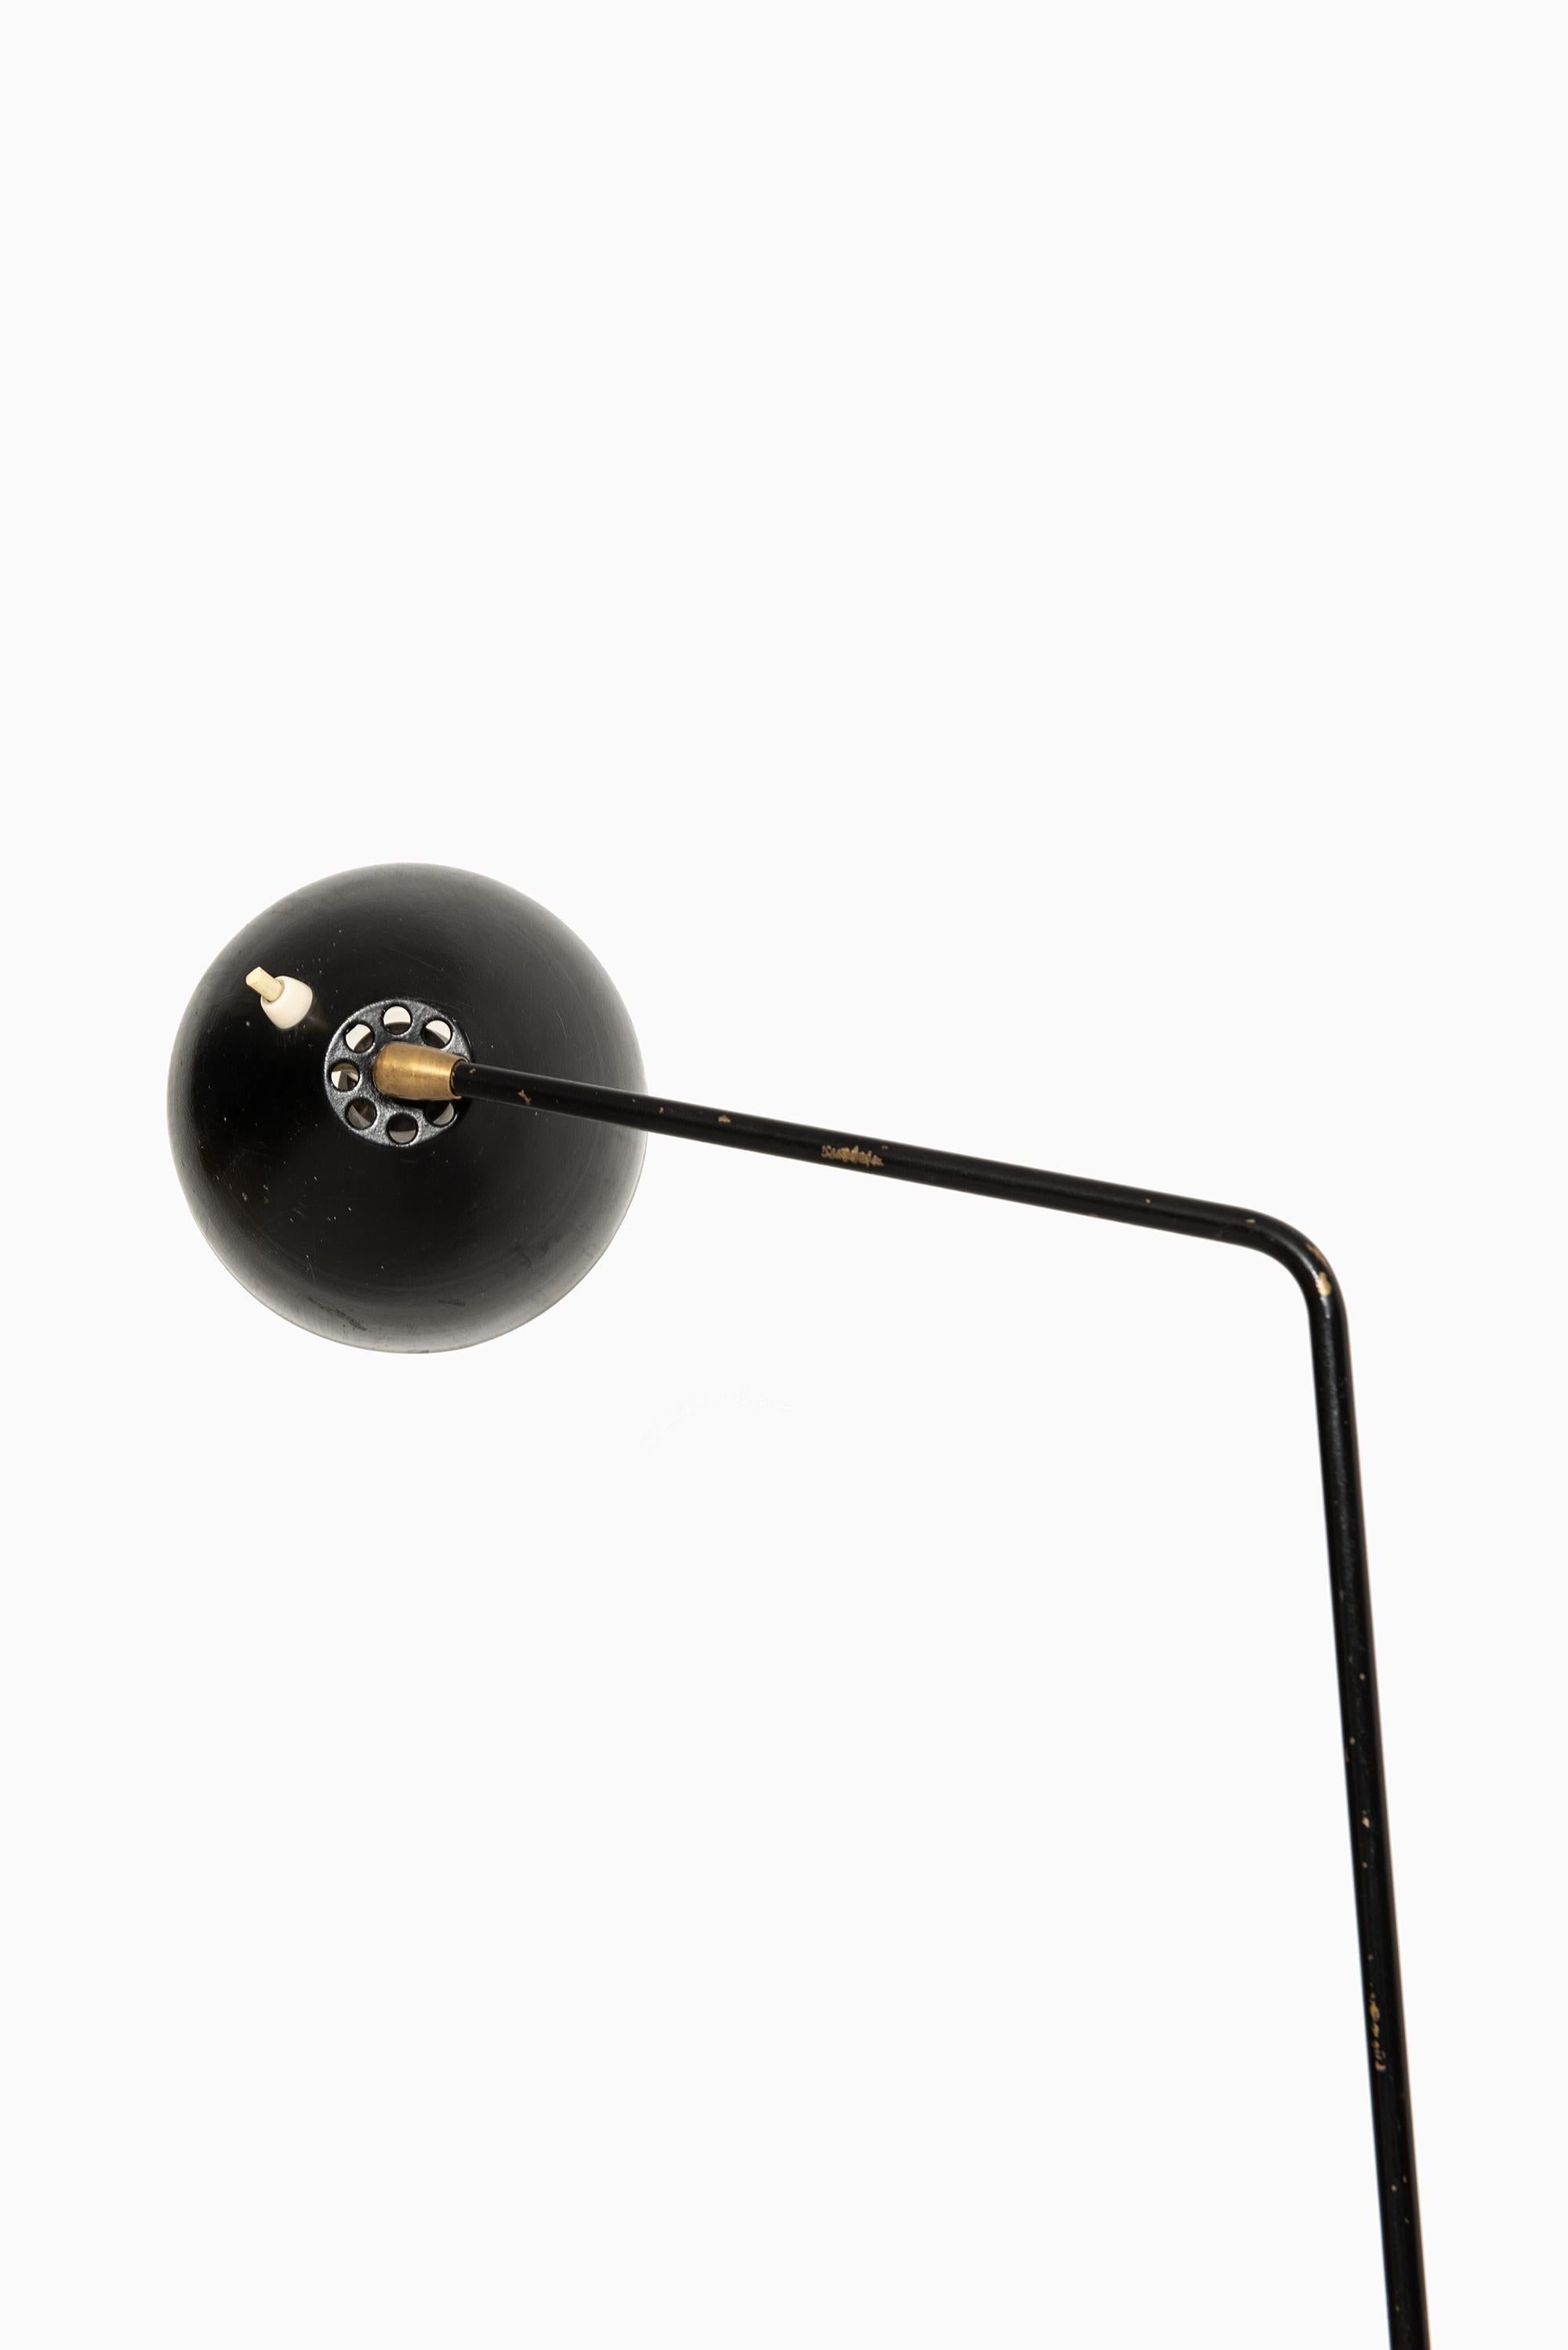 Swedish Floor Lamp in the Manner of Greta Magnusson-Grossman Produced in Sweden For Sale